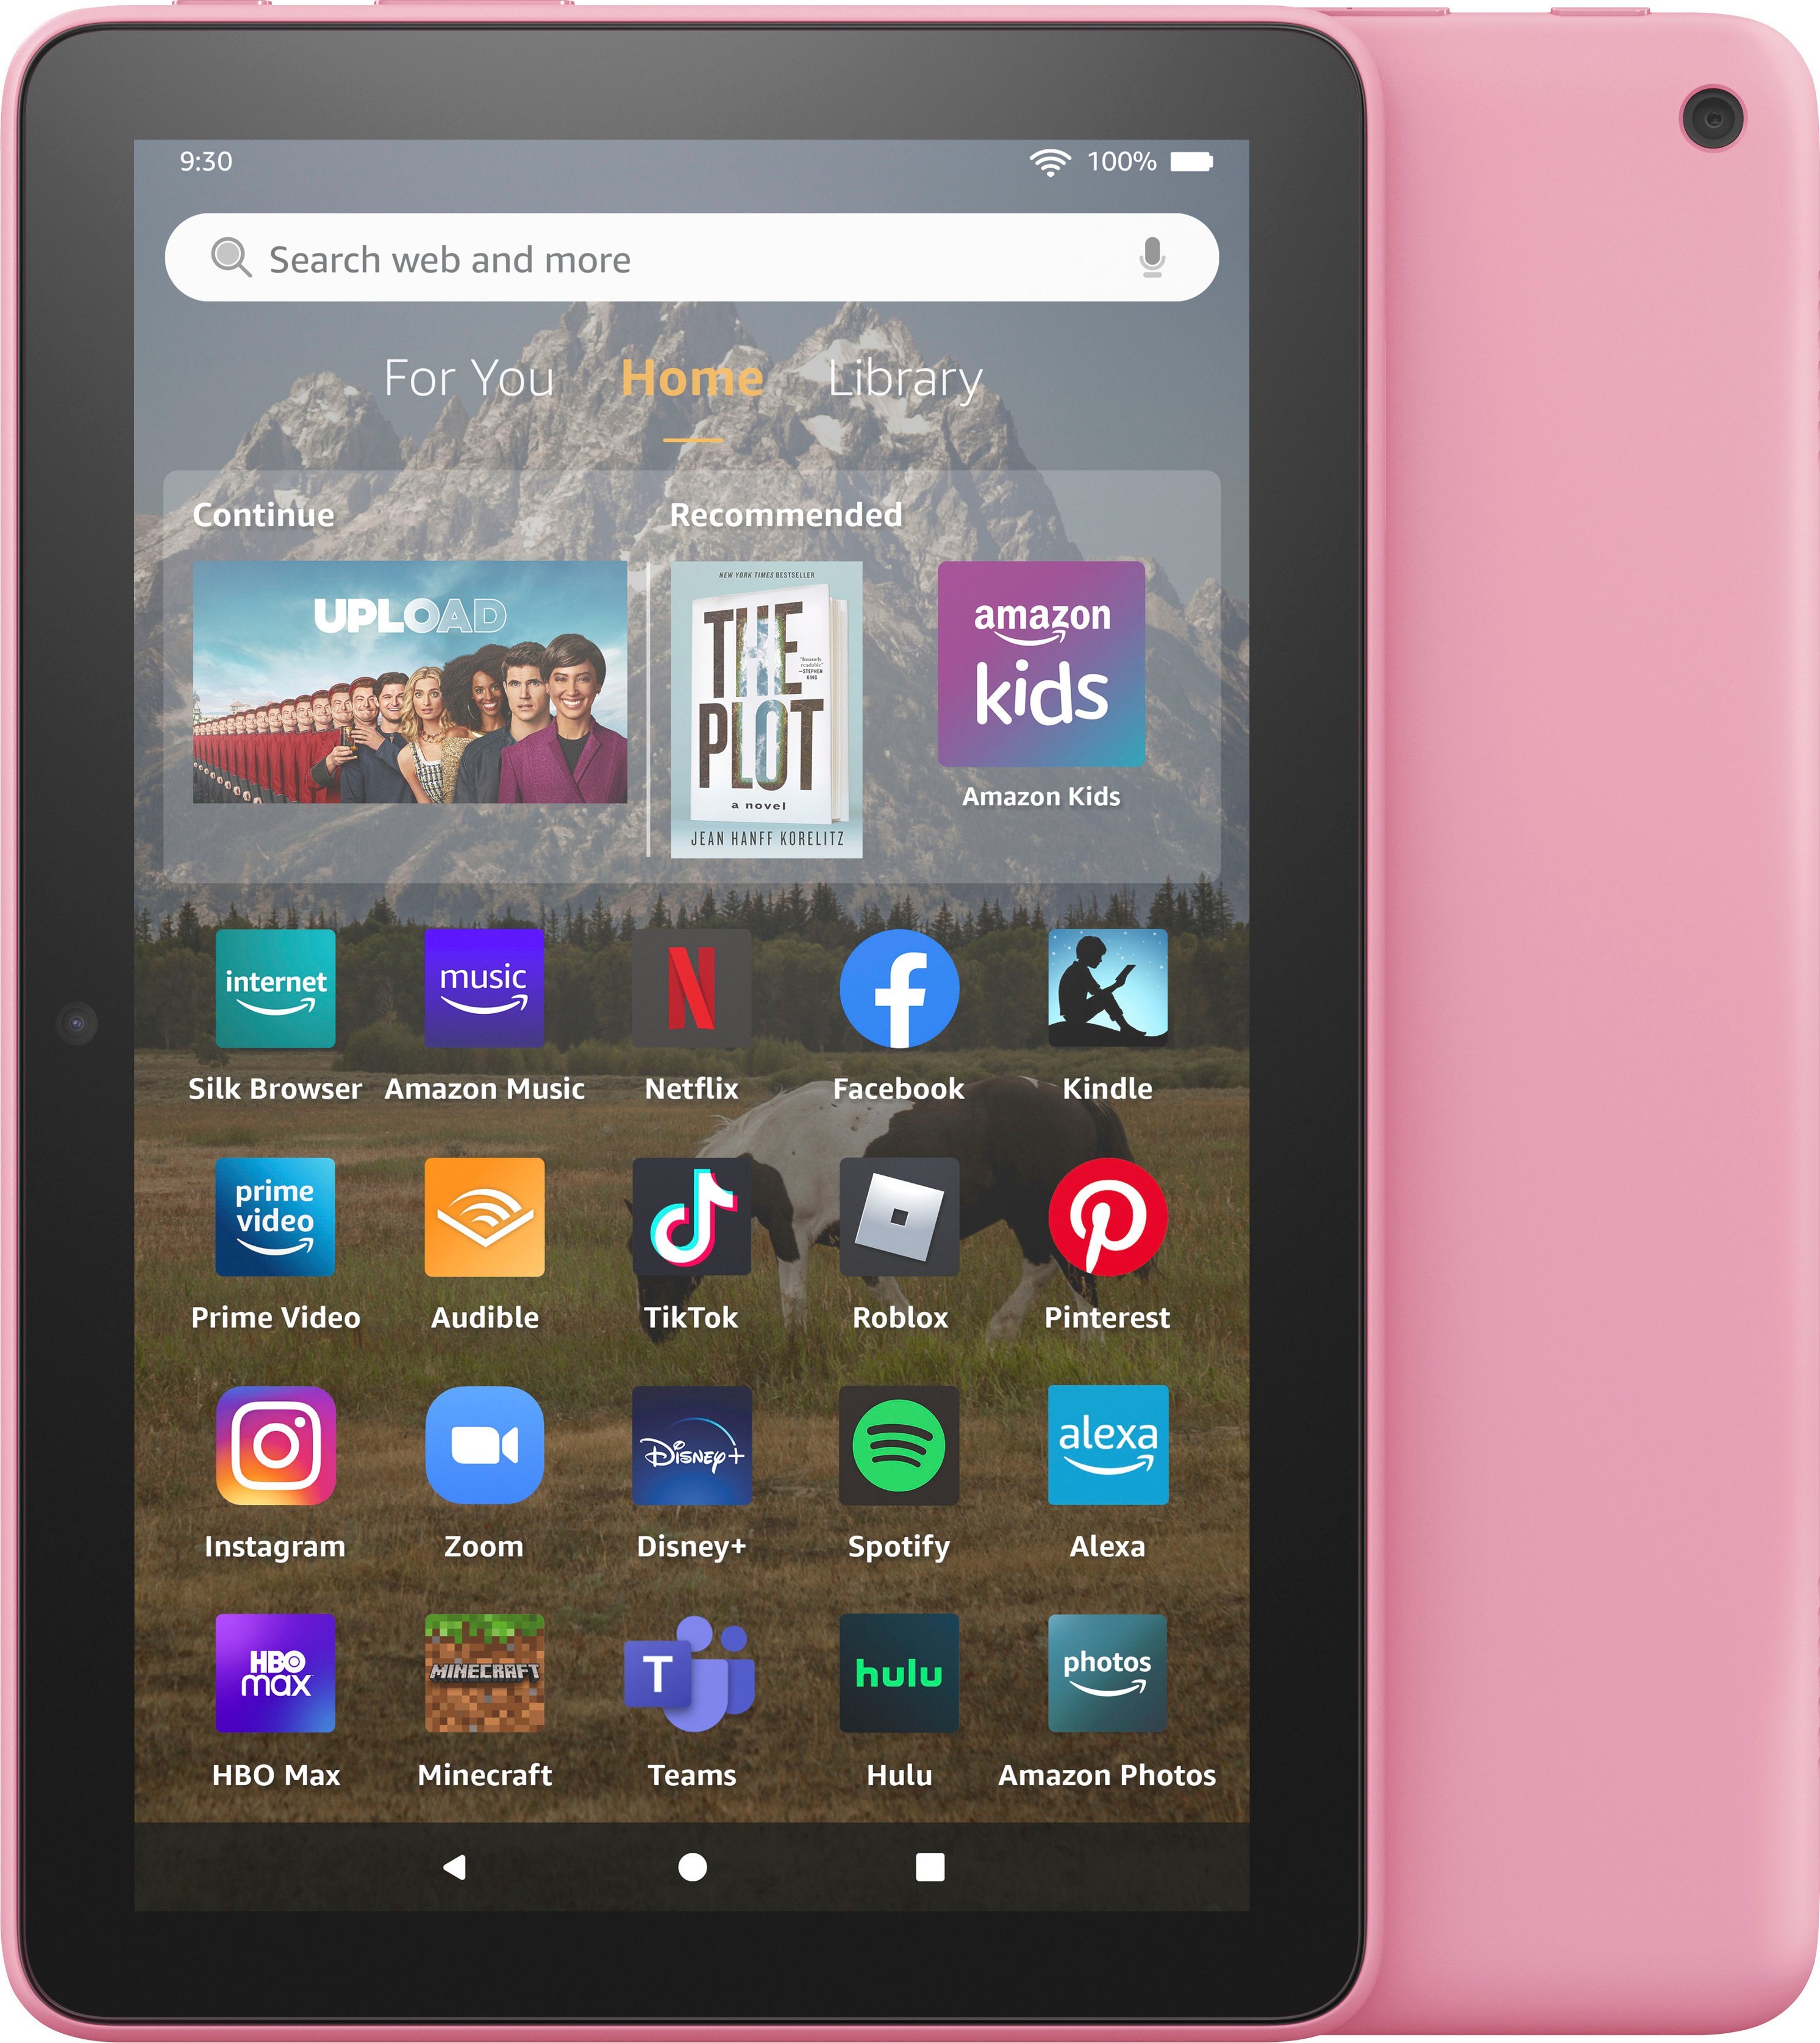 Buy  Fire 7 7 Inch 16GB Wi-Fi Tablet - Pink, Tablets